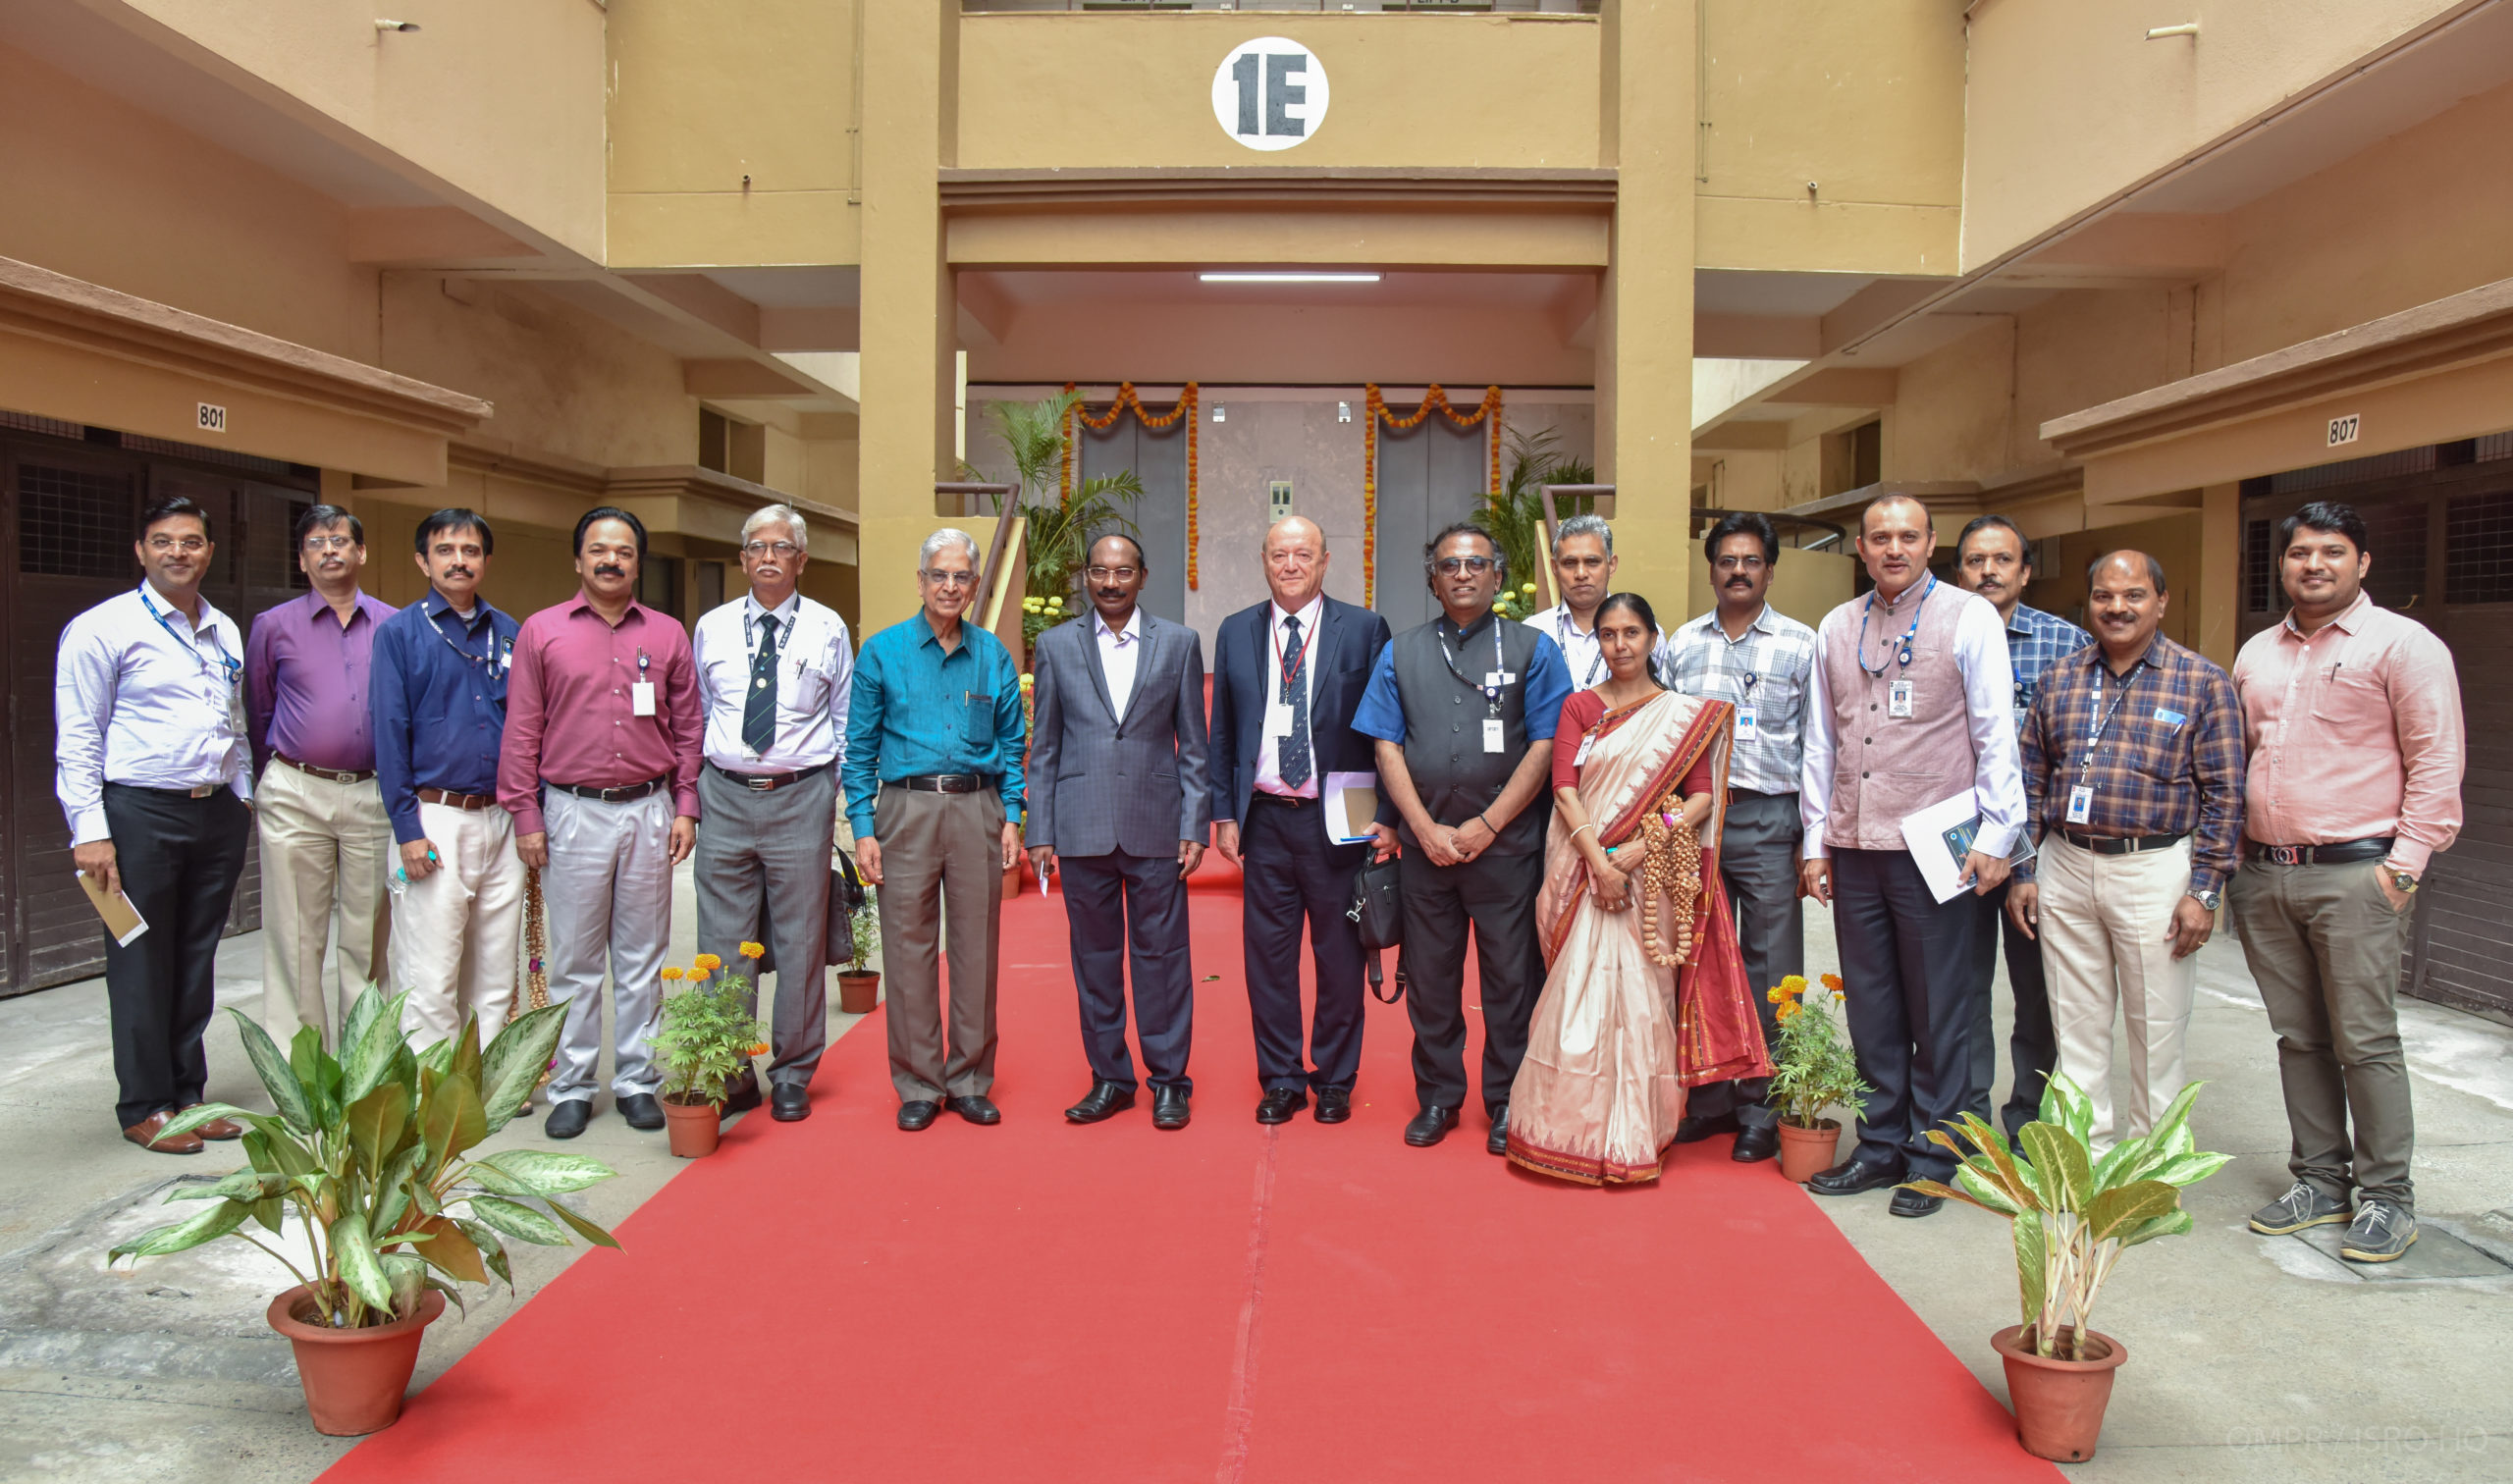 Inaugural ceremony for the IAA office at Bangalore, India August 2019